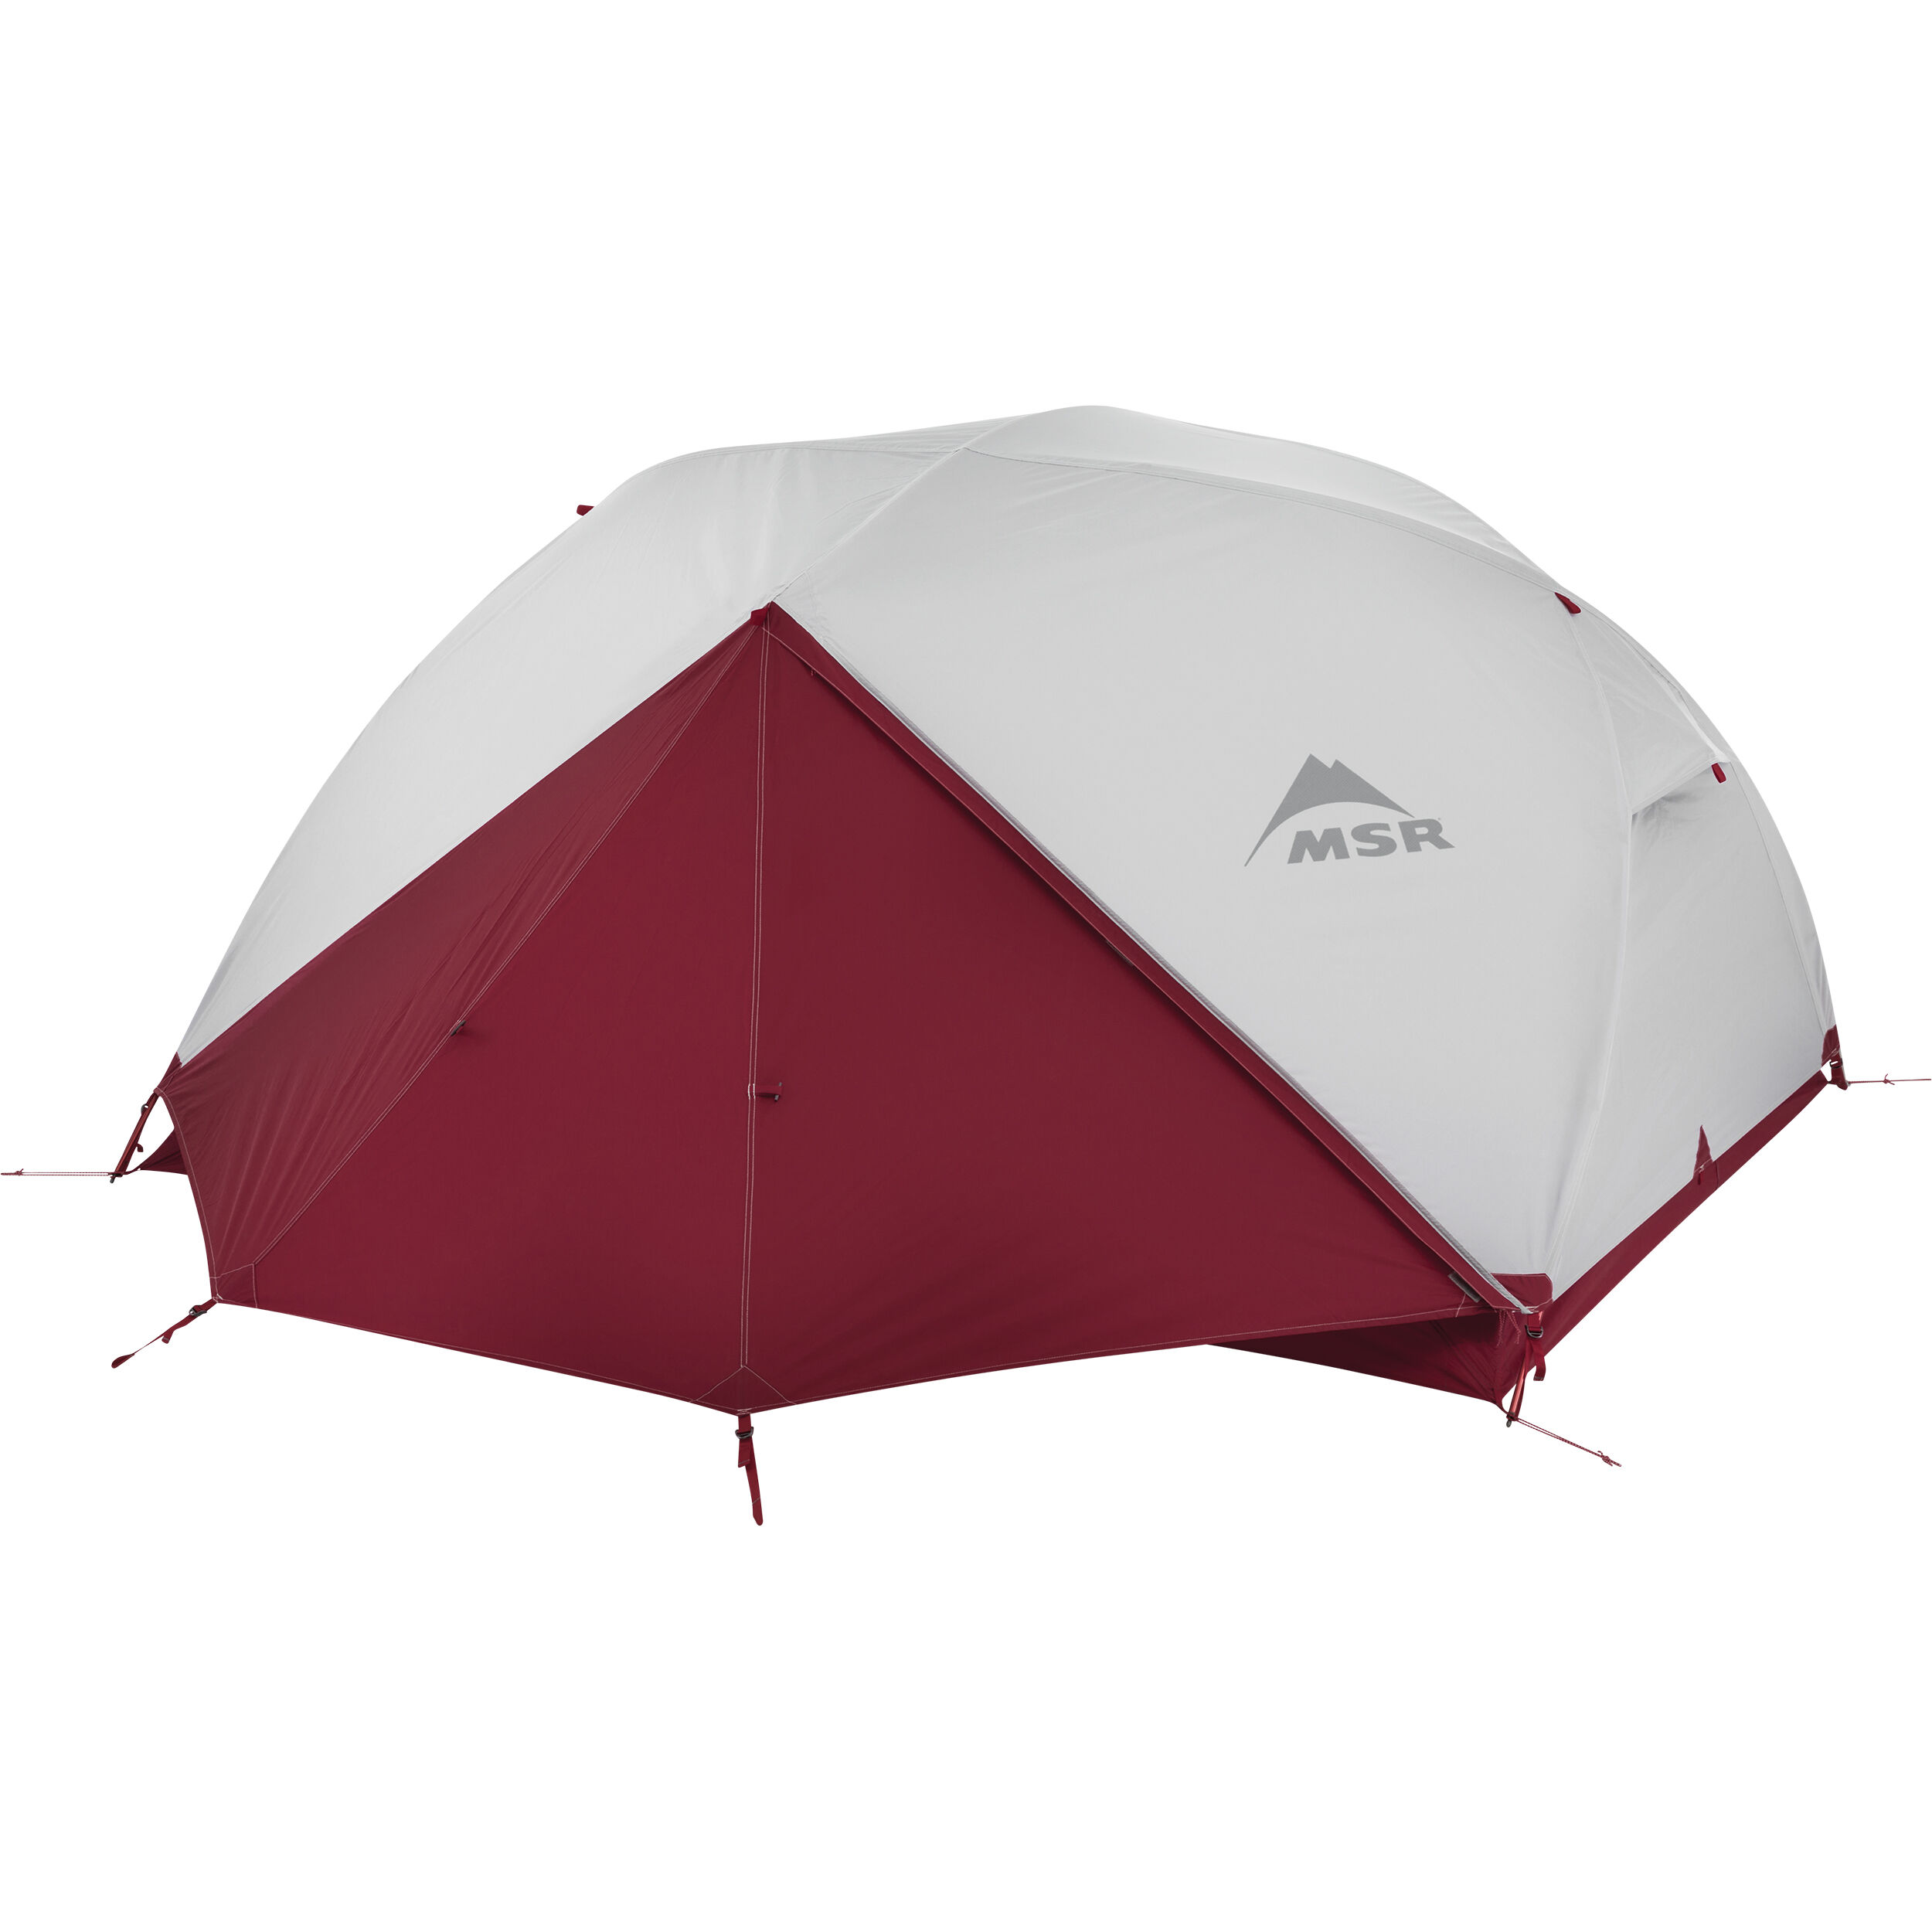 Elixir™ 3 Extra Roomy 3-Person Backpacking Tent | MSR®